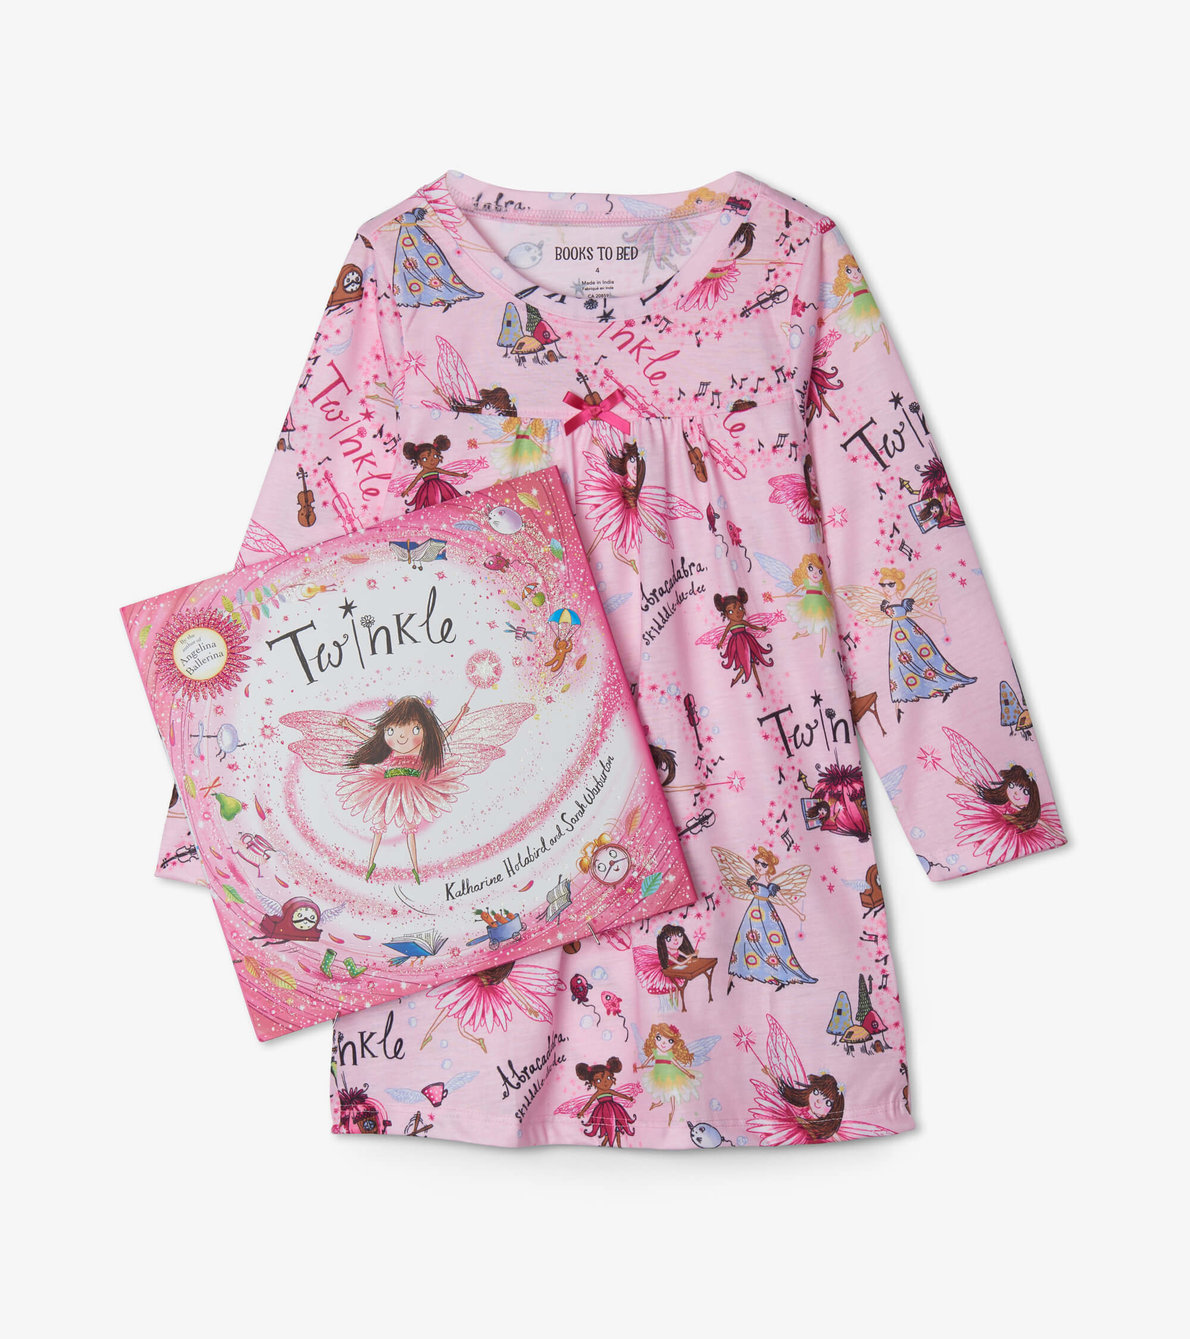 View larger image of Twinkle Book and Nightdress Set